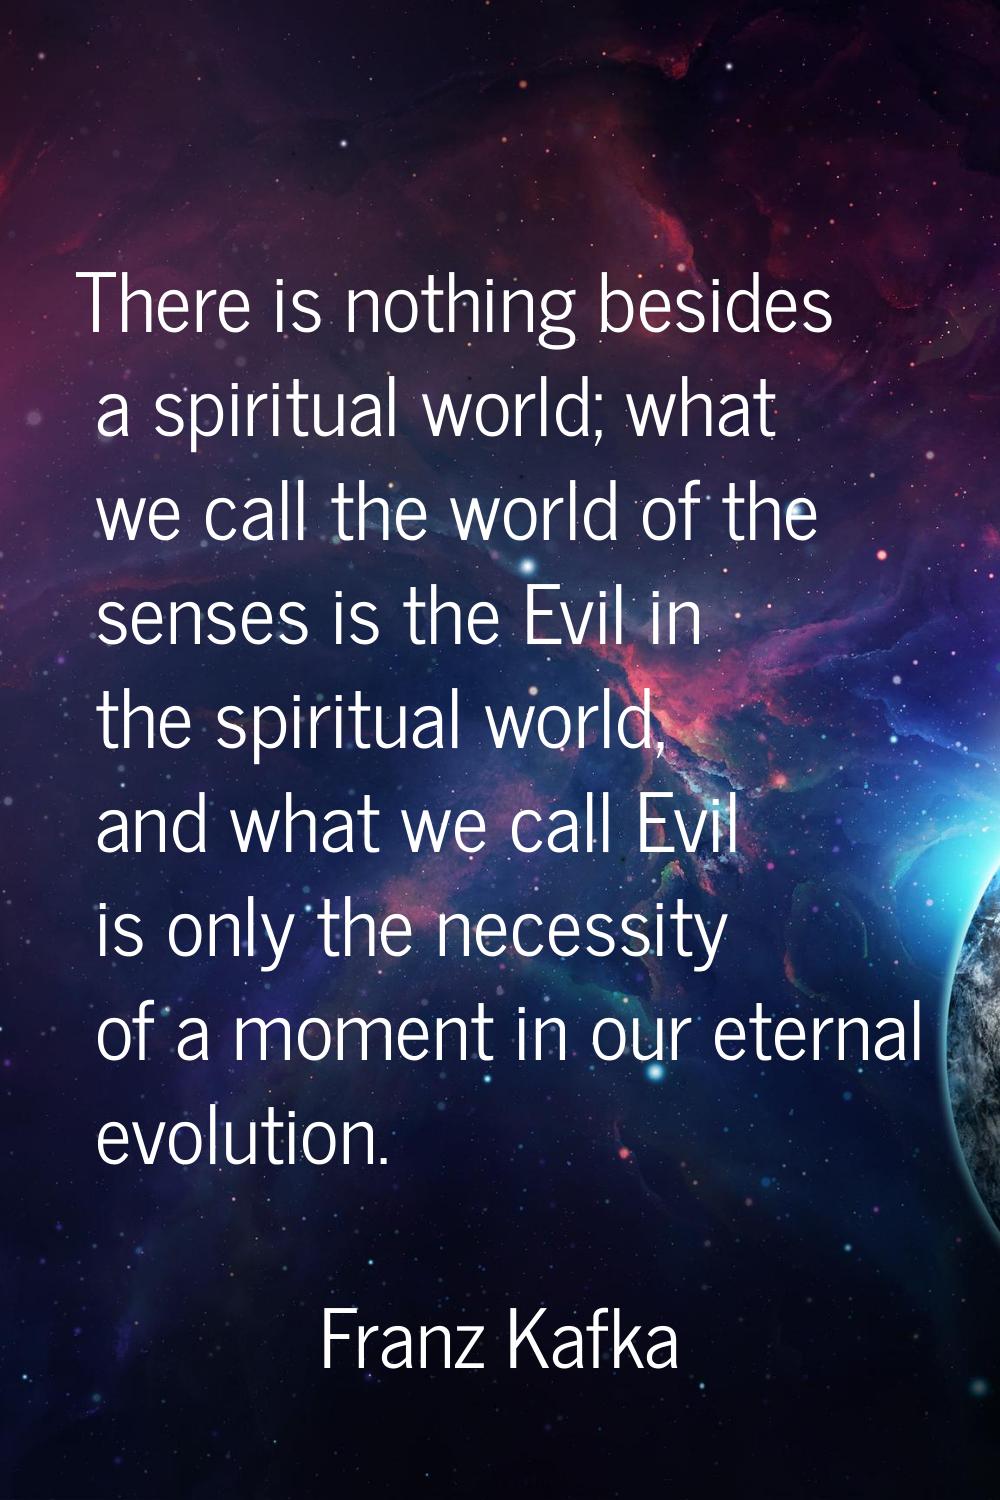 There is nothing besides a spiritual world; what we call the world of the senses is the Evil in the